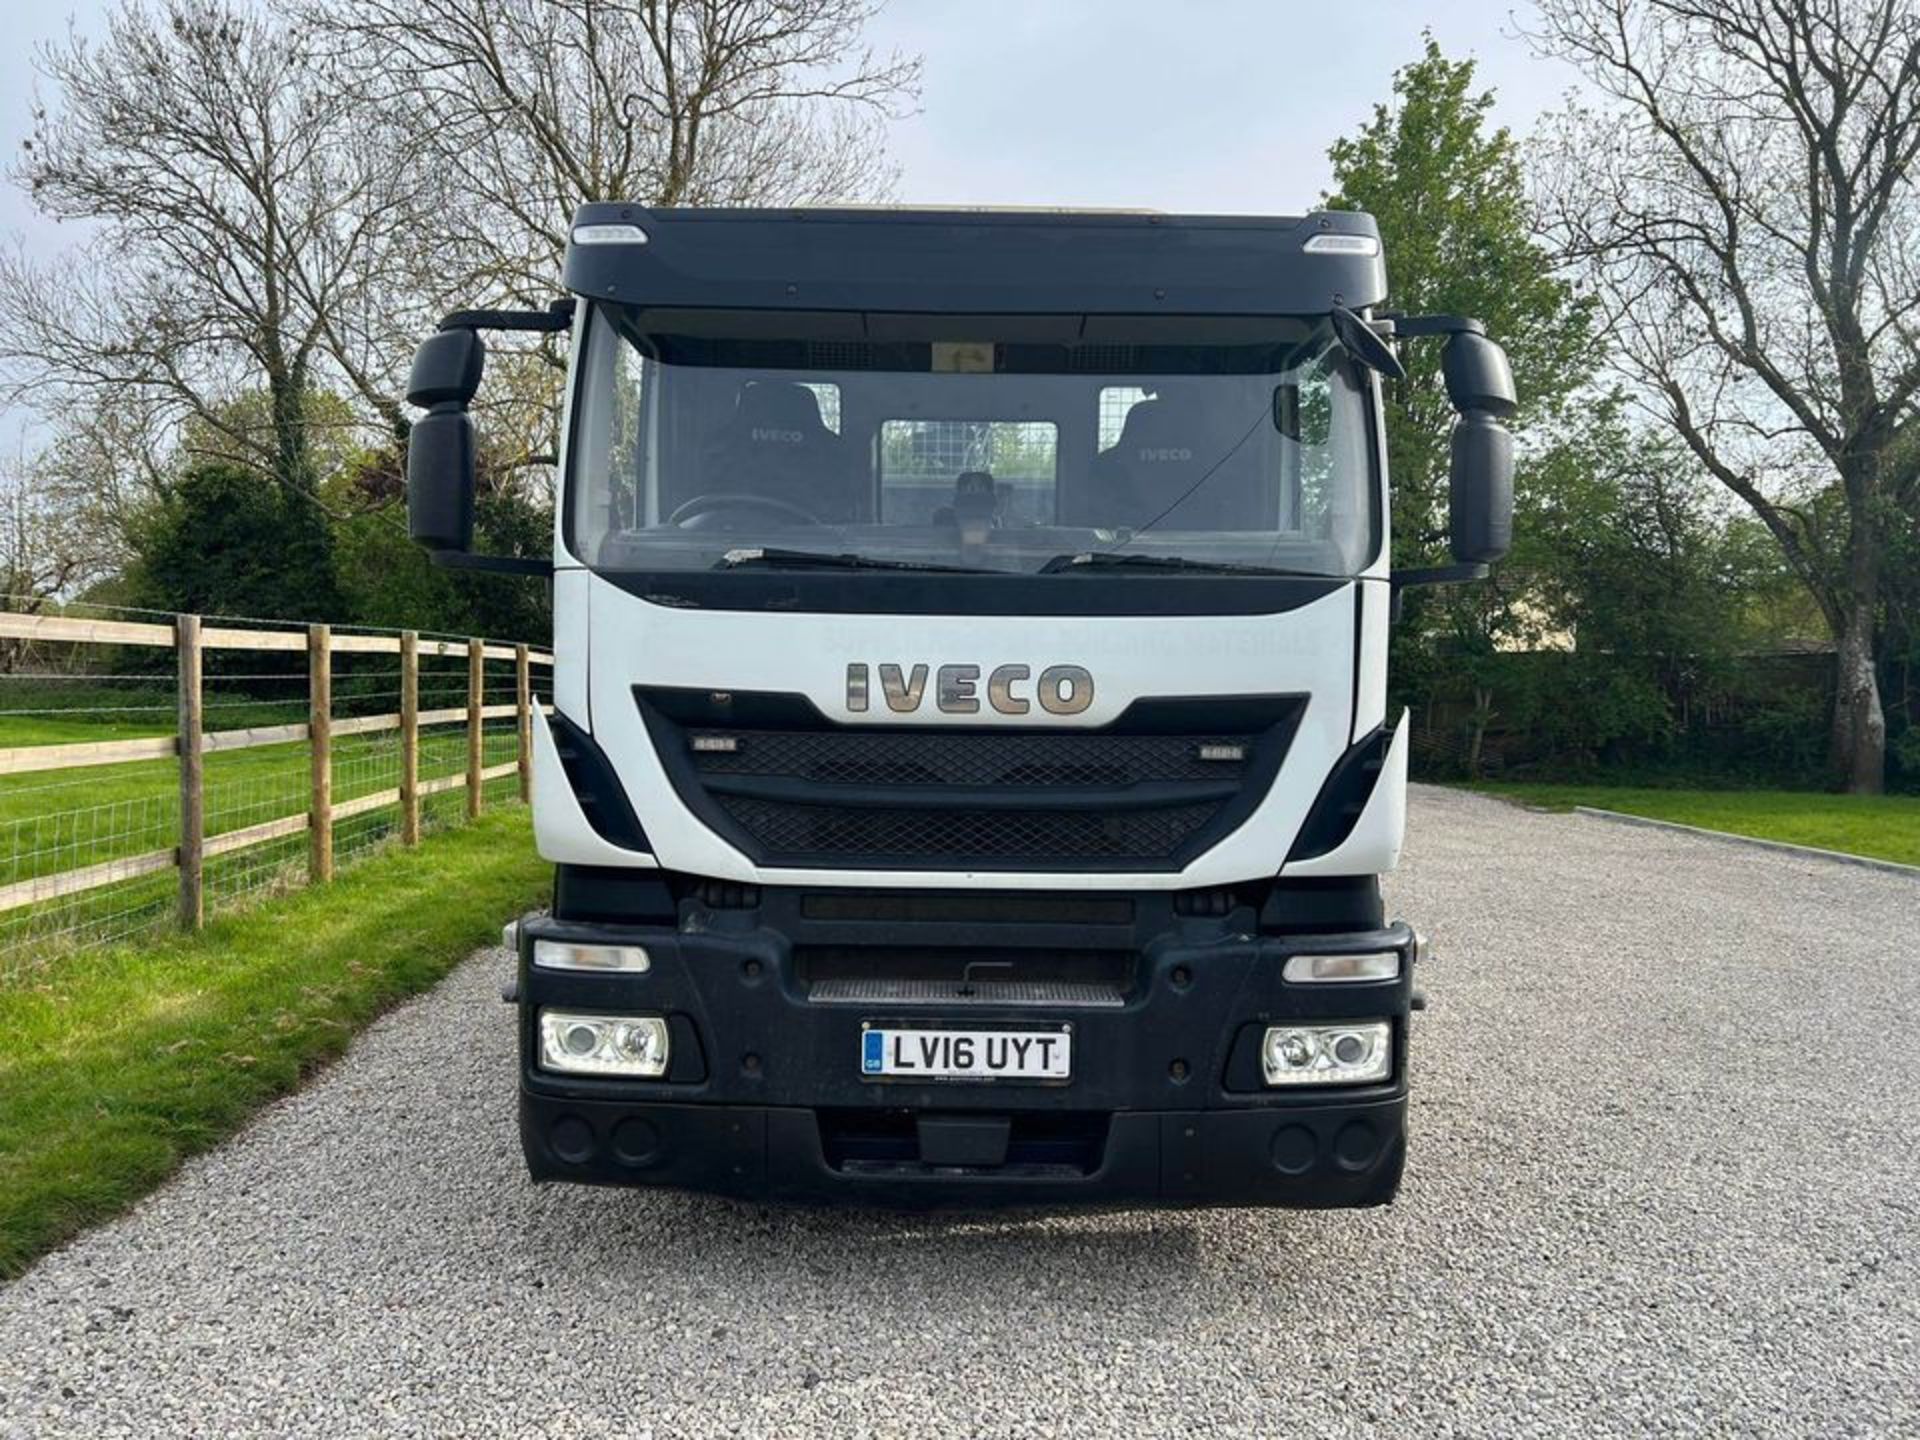 2016, IVECO Stralis - 400 Hiab Lorry (6 x 2 Euro 6 Crane Truck - 26 tons - Image 3 of 13